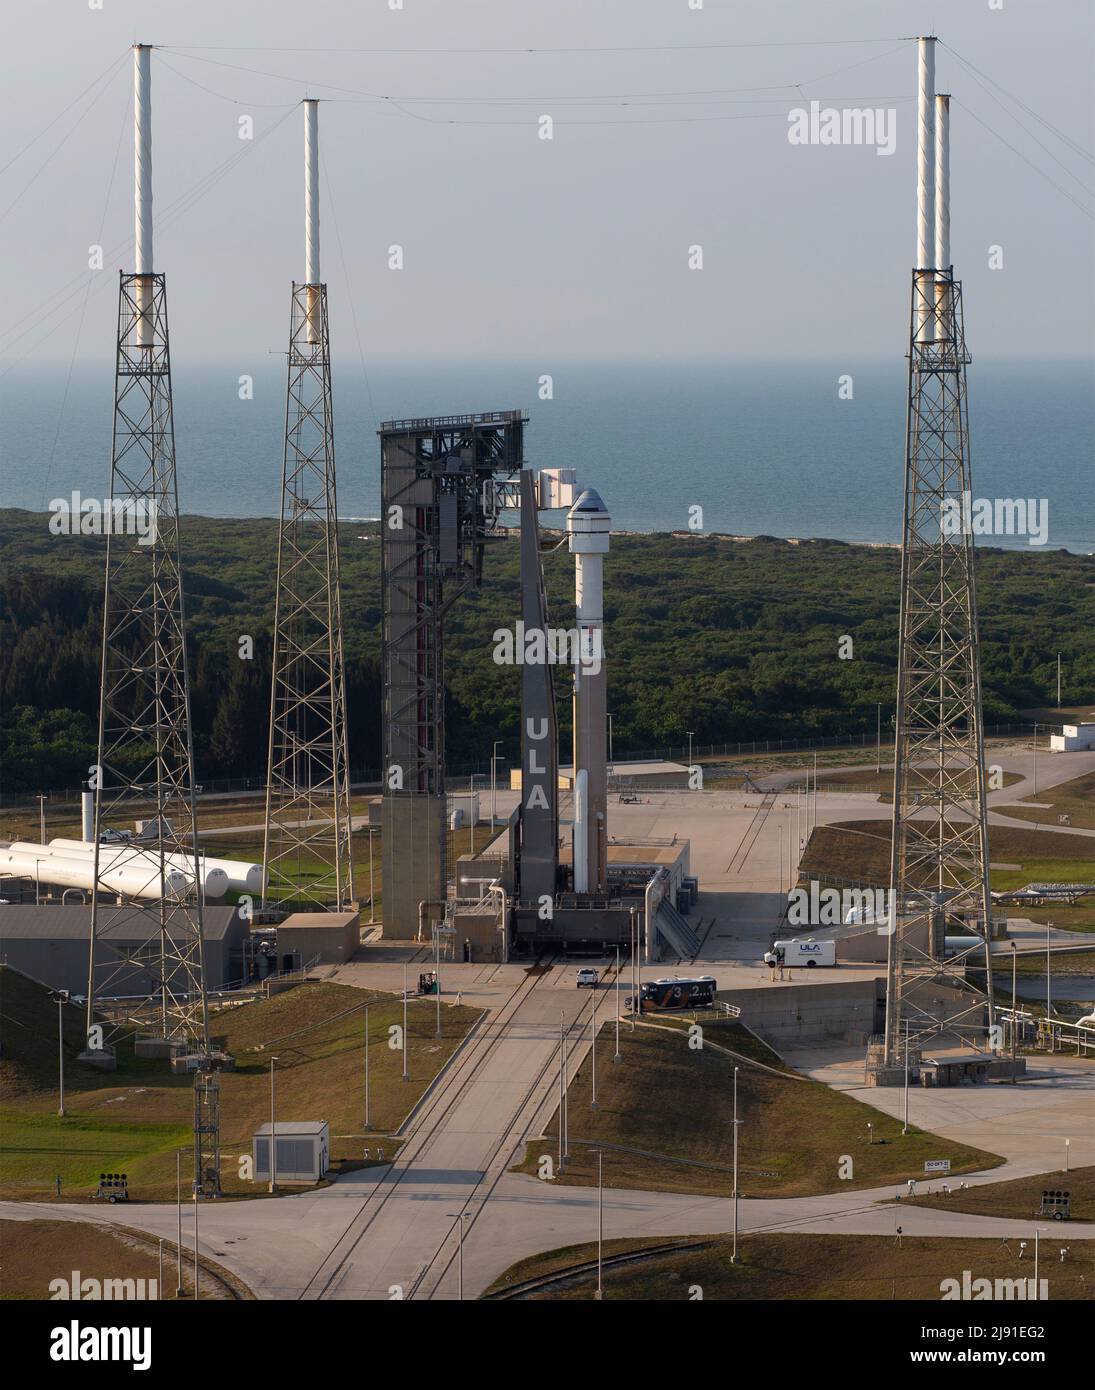 Cape Canaveral, United States of America. 18 May, 2022. The United Launch Alliance Atlas V rocket carrying the Boeing CST-100 Starliner spacecraft aboard at Space Launch Complex 41 ahead of the Orbital Flight Test-2 mission at Cape Canaveral Space Force Station, May 18, 2022 in Cape Canaveral, Florida. The Flight Test-2 will be second un-crewed flight test and will dock to the International Space Station. Credit: Joel Kowsky/NASA/Alamy Live News Stock Photo